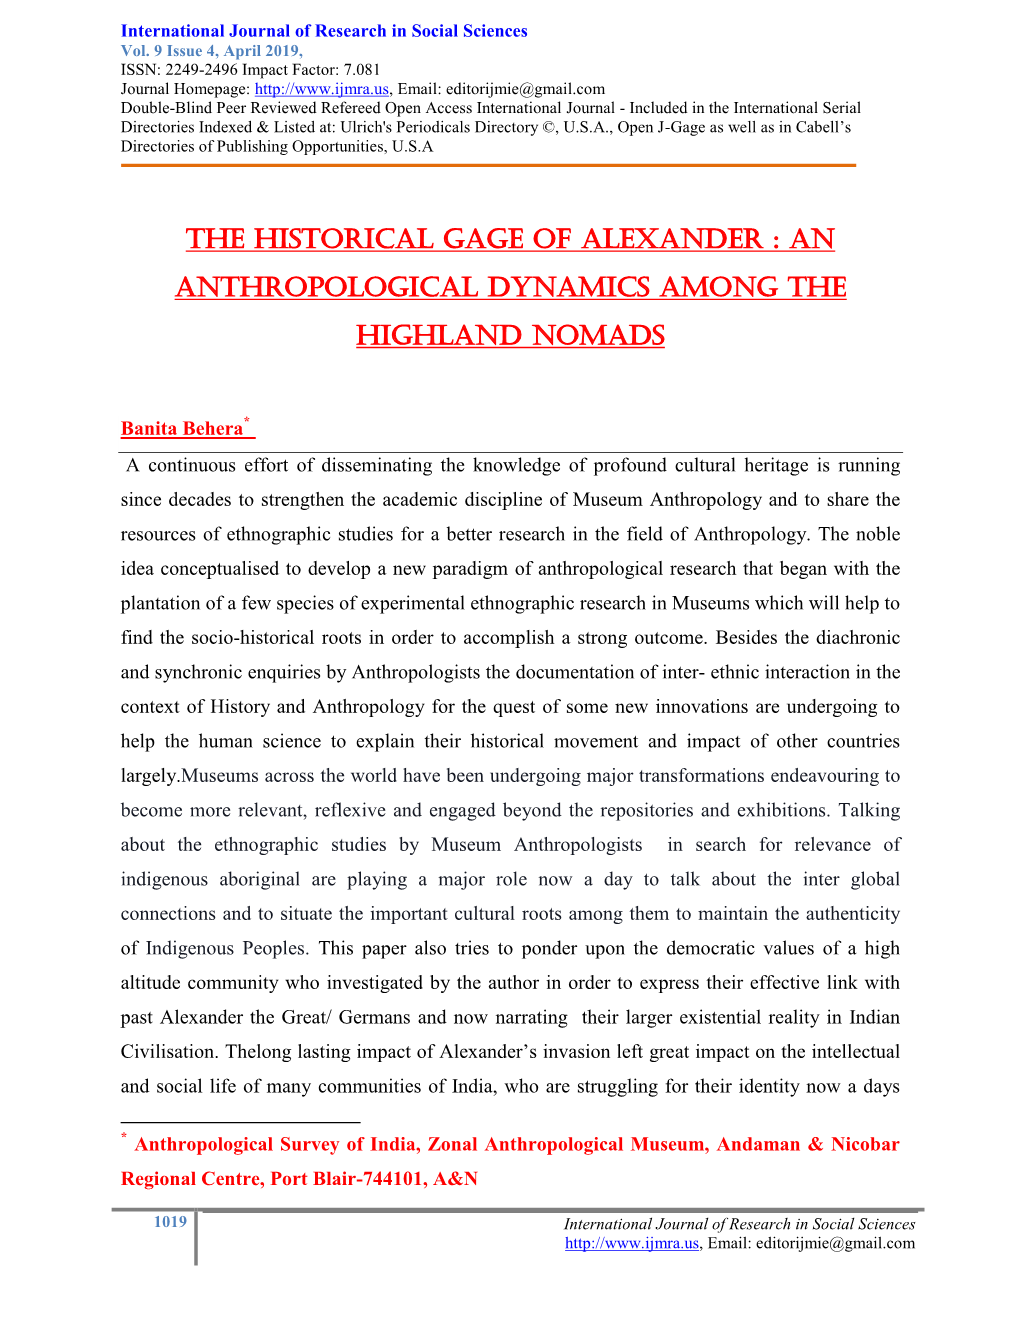 An Anthropological Dynamics Among the Highland Nomads